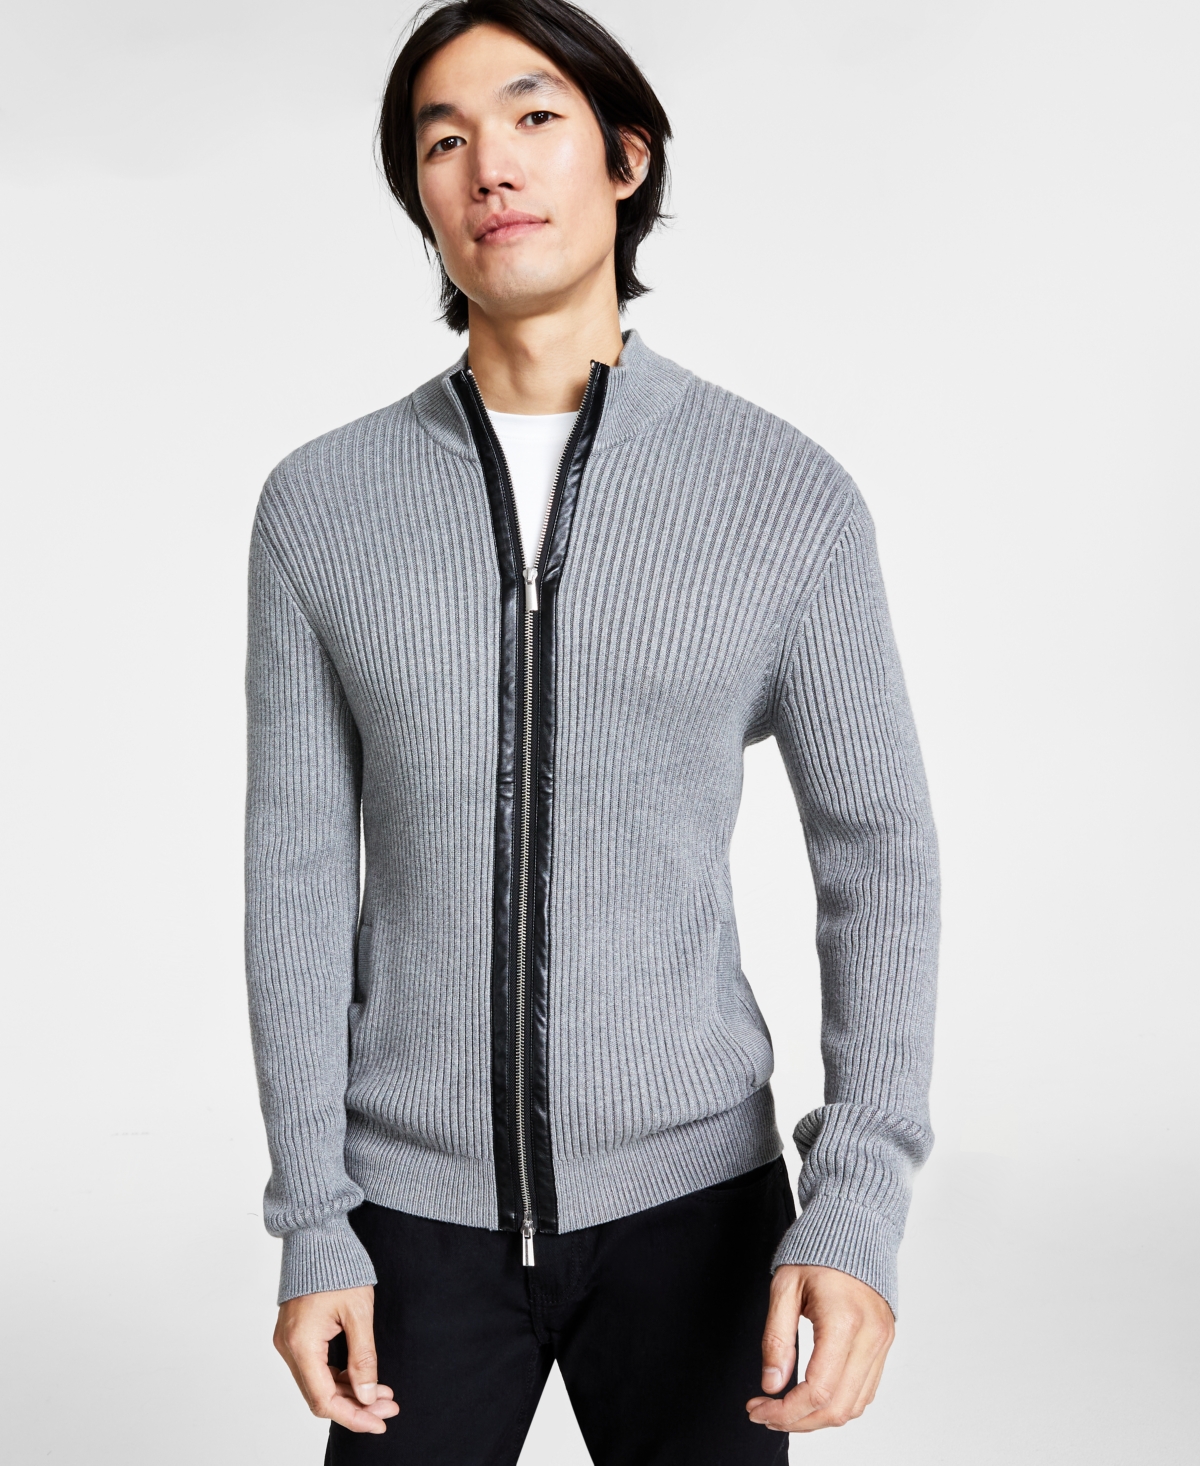 Men's Silas Regular-Fit Ribbed-Knit Full-Zip Mock Neck Cardigan with Faux-Leather Trim, Created for Macy's - Heather Gre